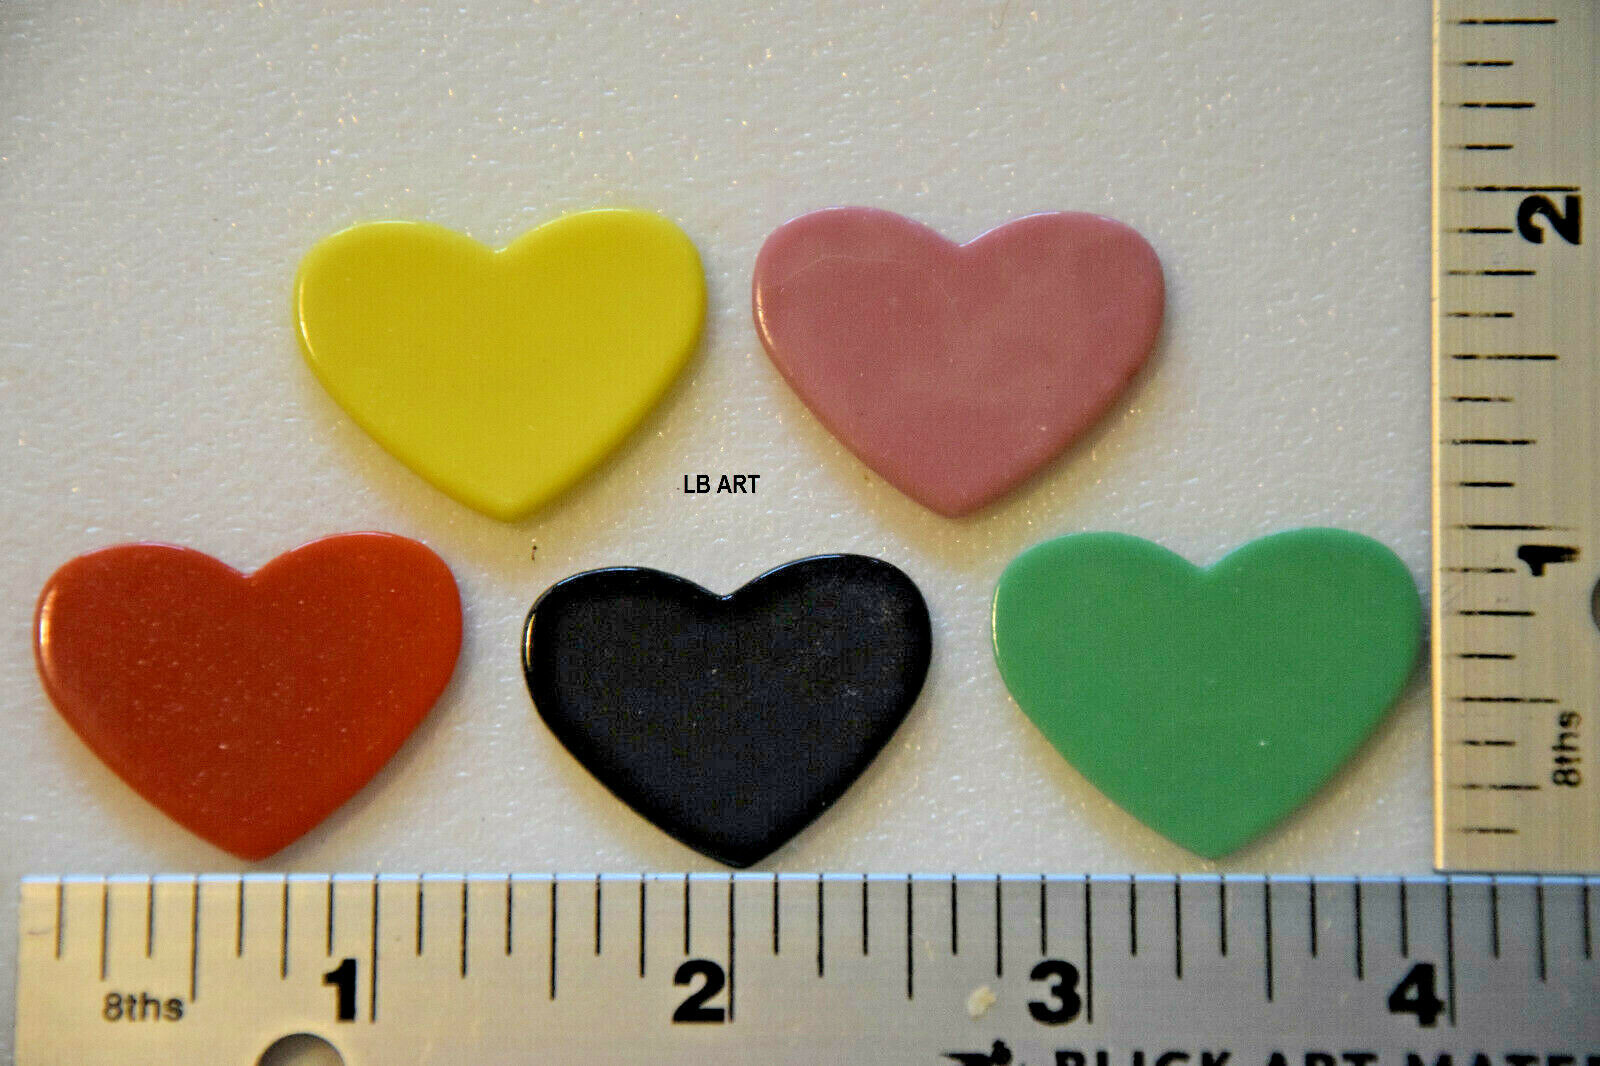 WASSER GLASS PACK OF 5 LARGE MIXED COLORED HEARTS 90 COE TESTED COMPATIBLE Wasser